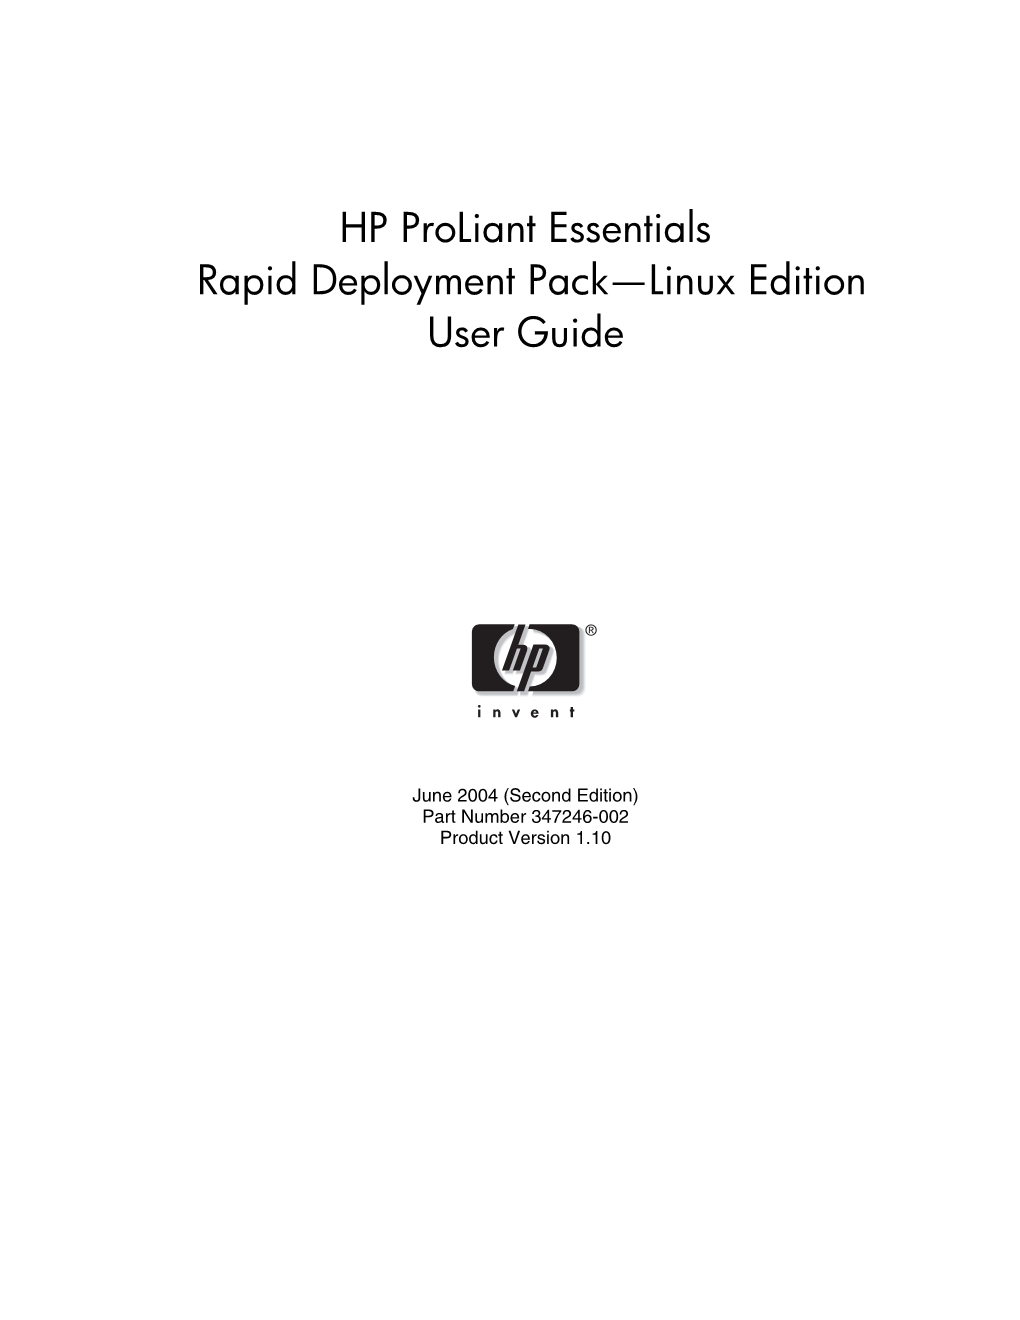 HP Proliant Essentials Rapid Deployment Pack—Linux Edition User Guide